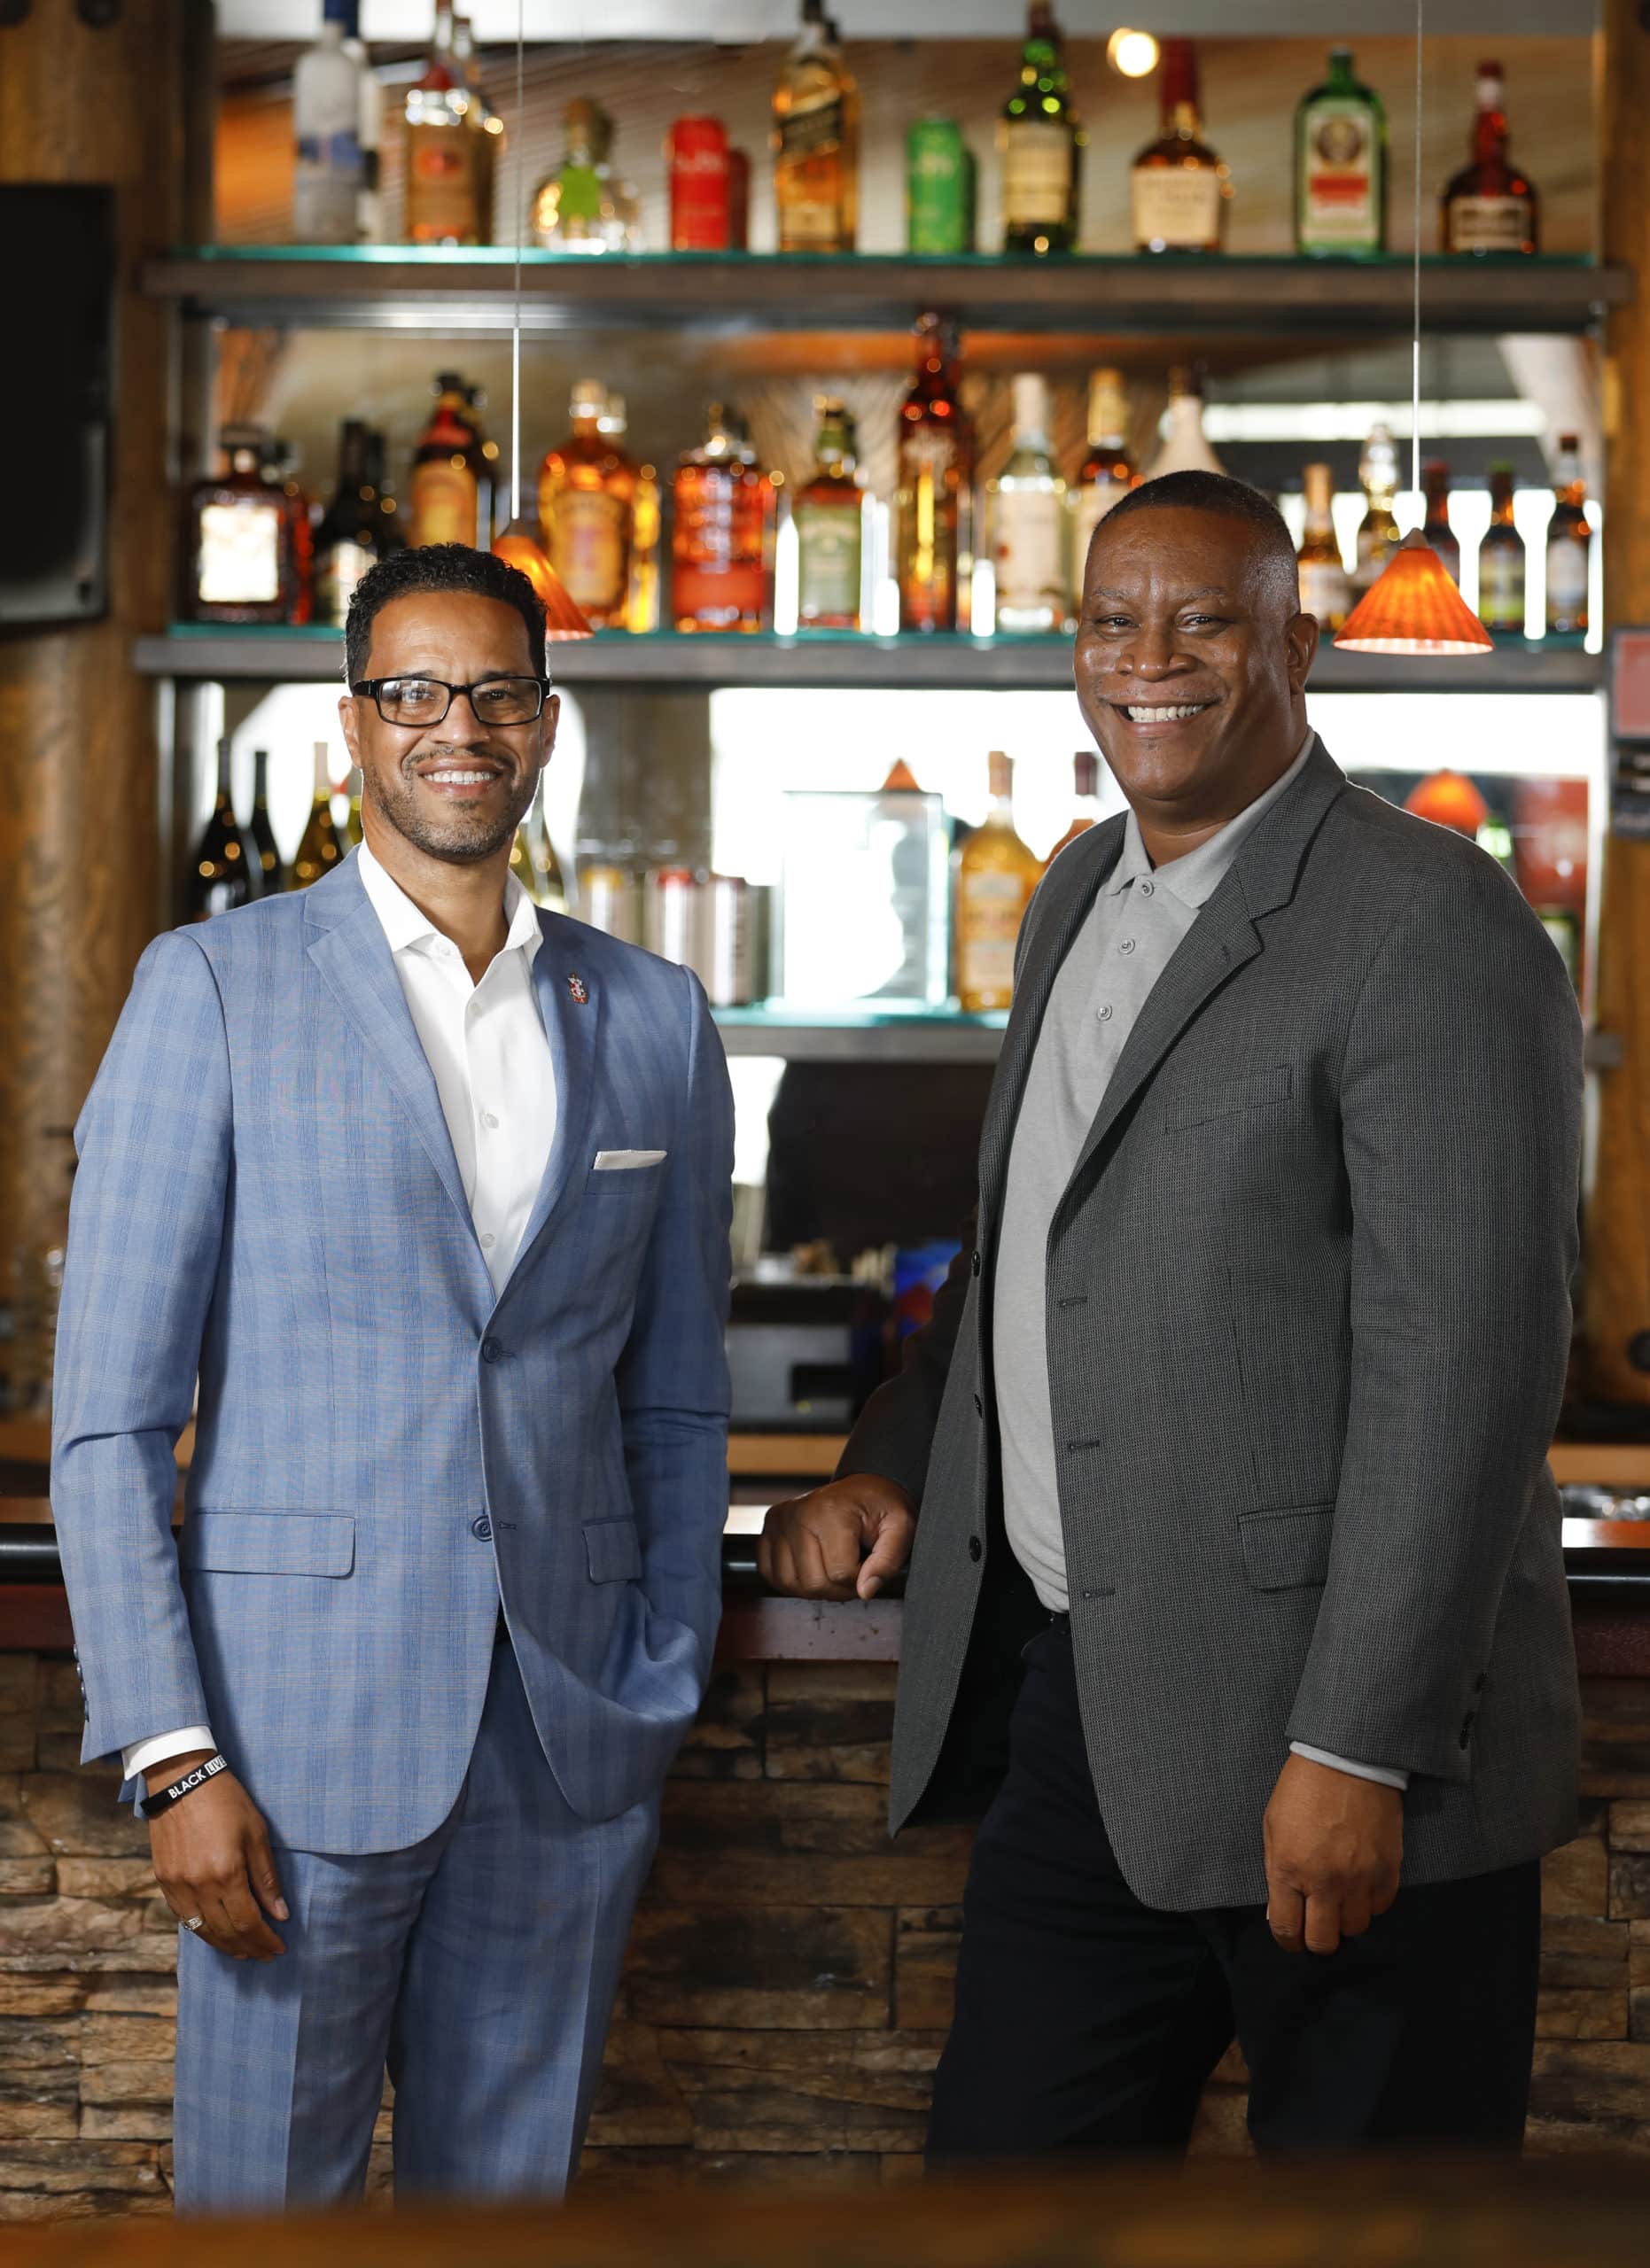 Africa Lounge owners Rod O' Neal and Jerry Whitsett